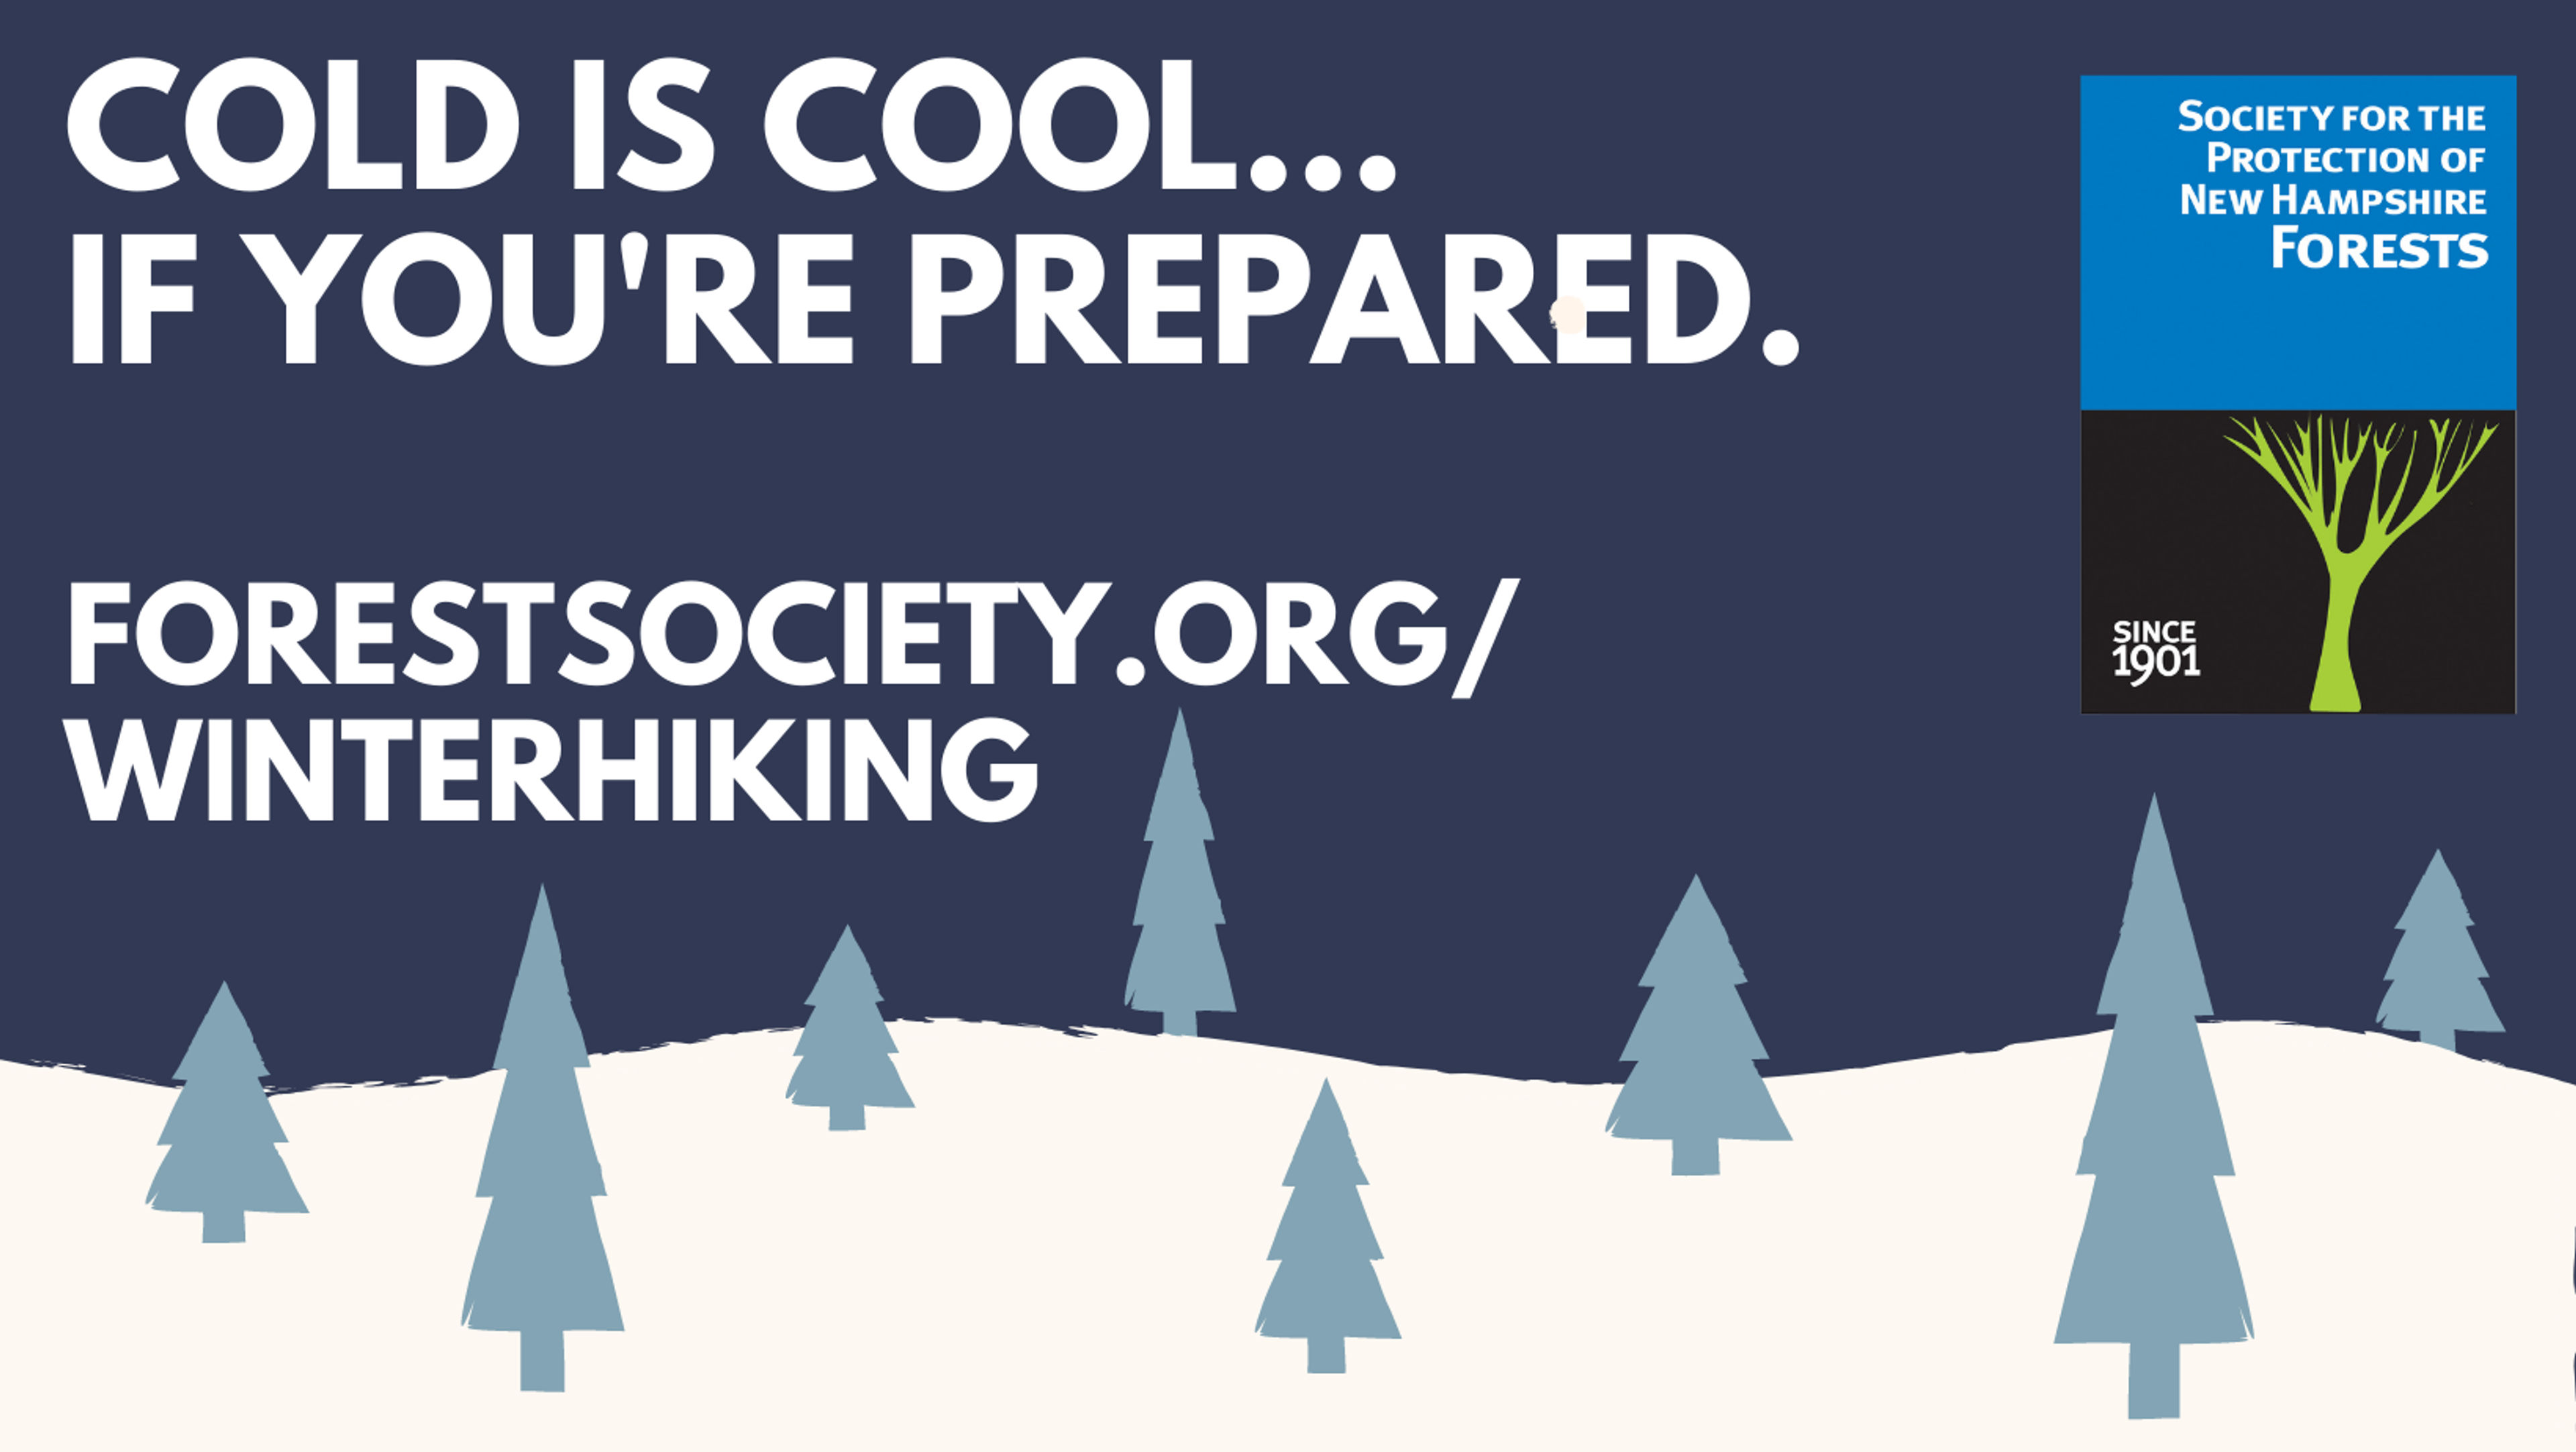 Cold is Cool, if you're prepared. forestsociety.org/winterhiking with a graphic of snow-covered hills and spruce trees.